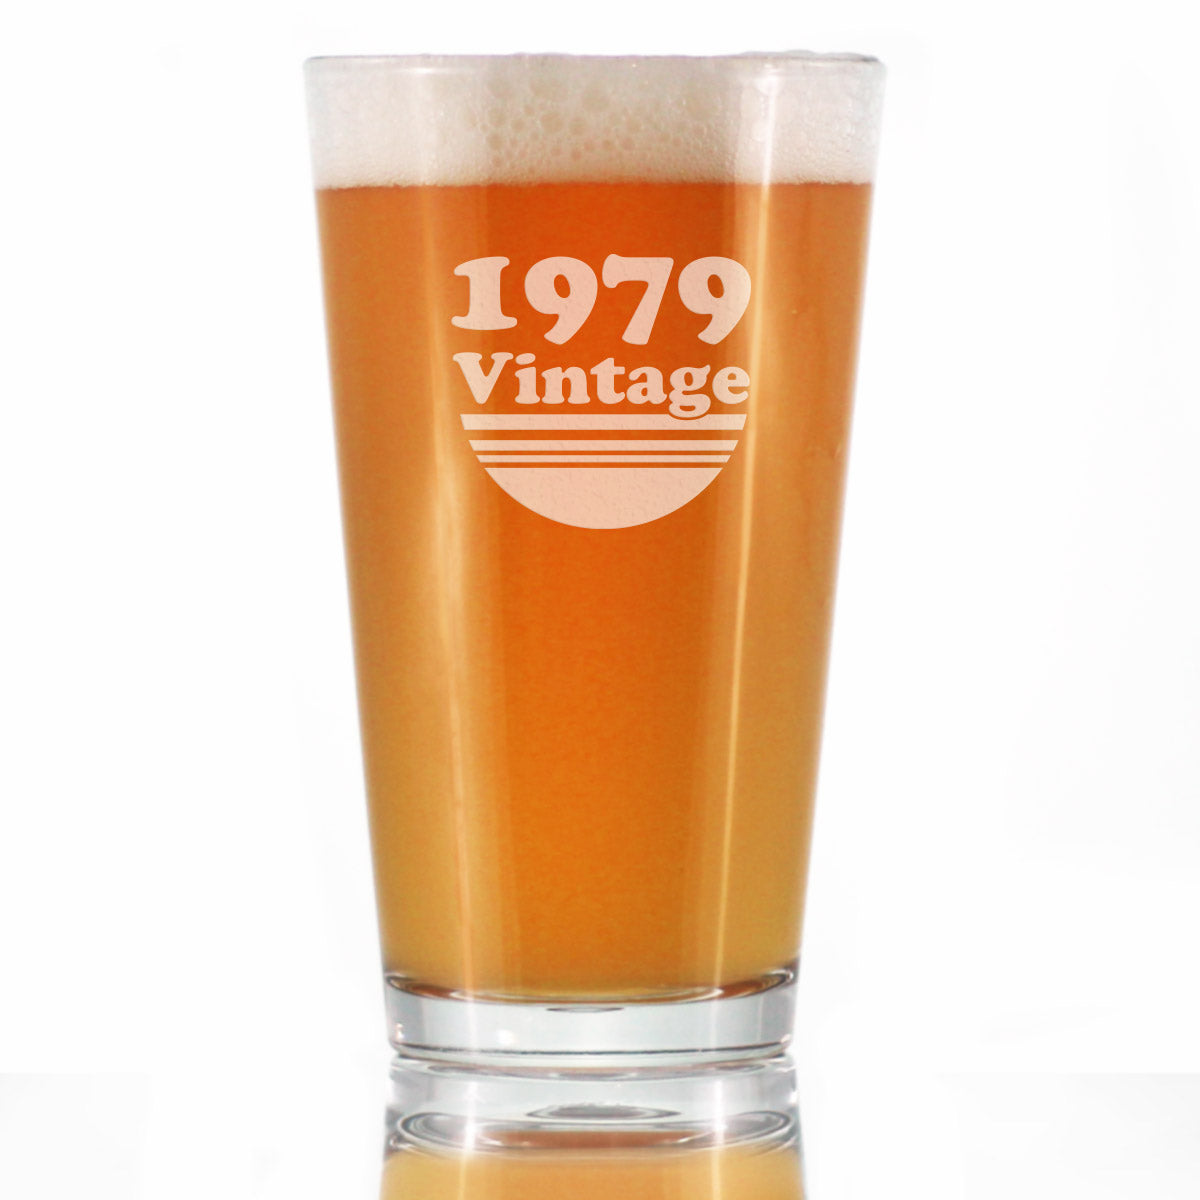 Vintage 1979 - Pint Glass for Beer - 44th Birthday Gifts for Men or Women Turning 44 - Fun Bday Party Decor - 16 oz